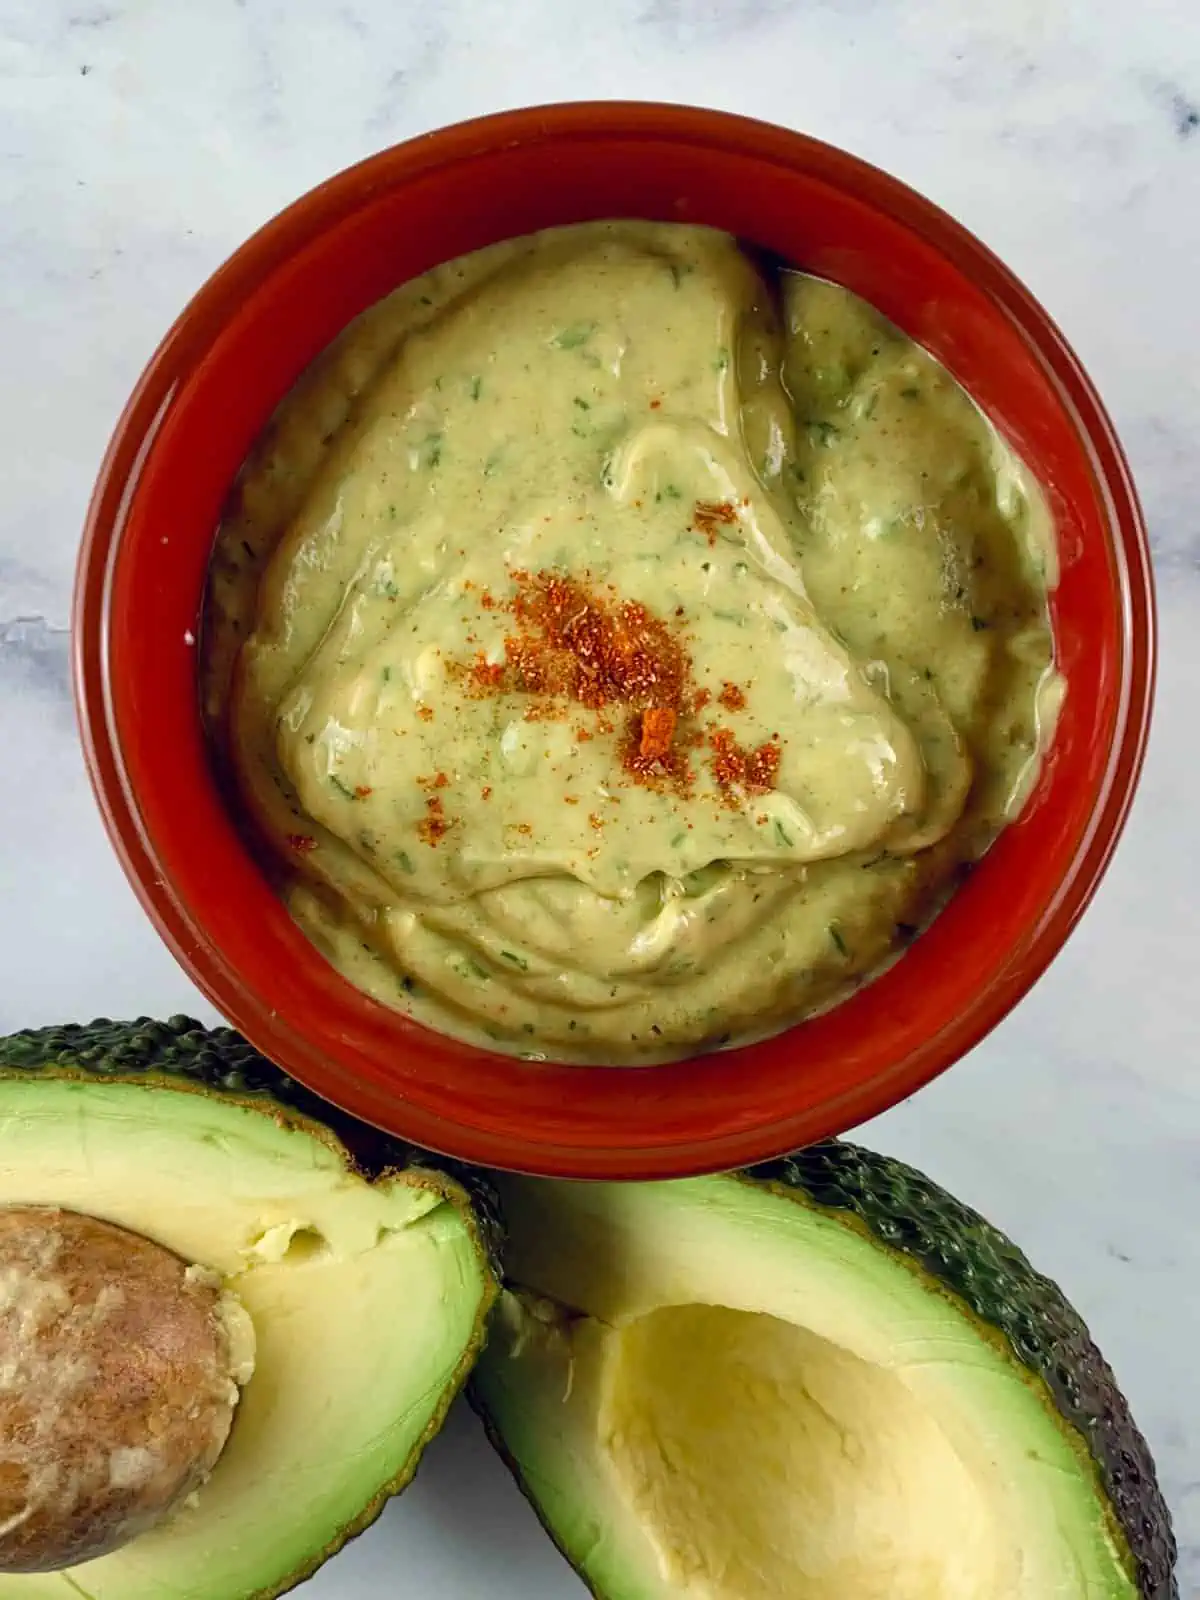 AVOCADO RANCH DRESSING IN RED BOWL WITH AVOCADOS ON THE SIDE